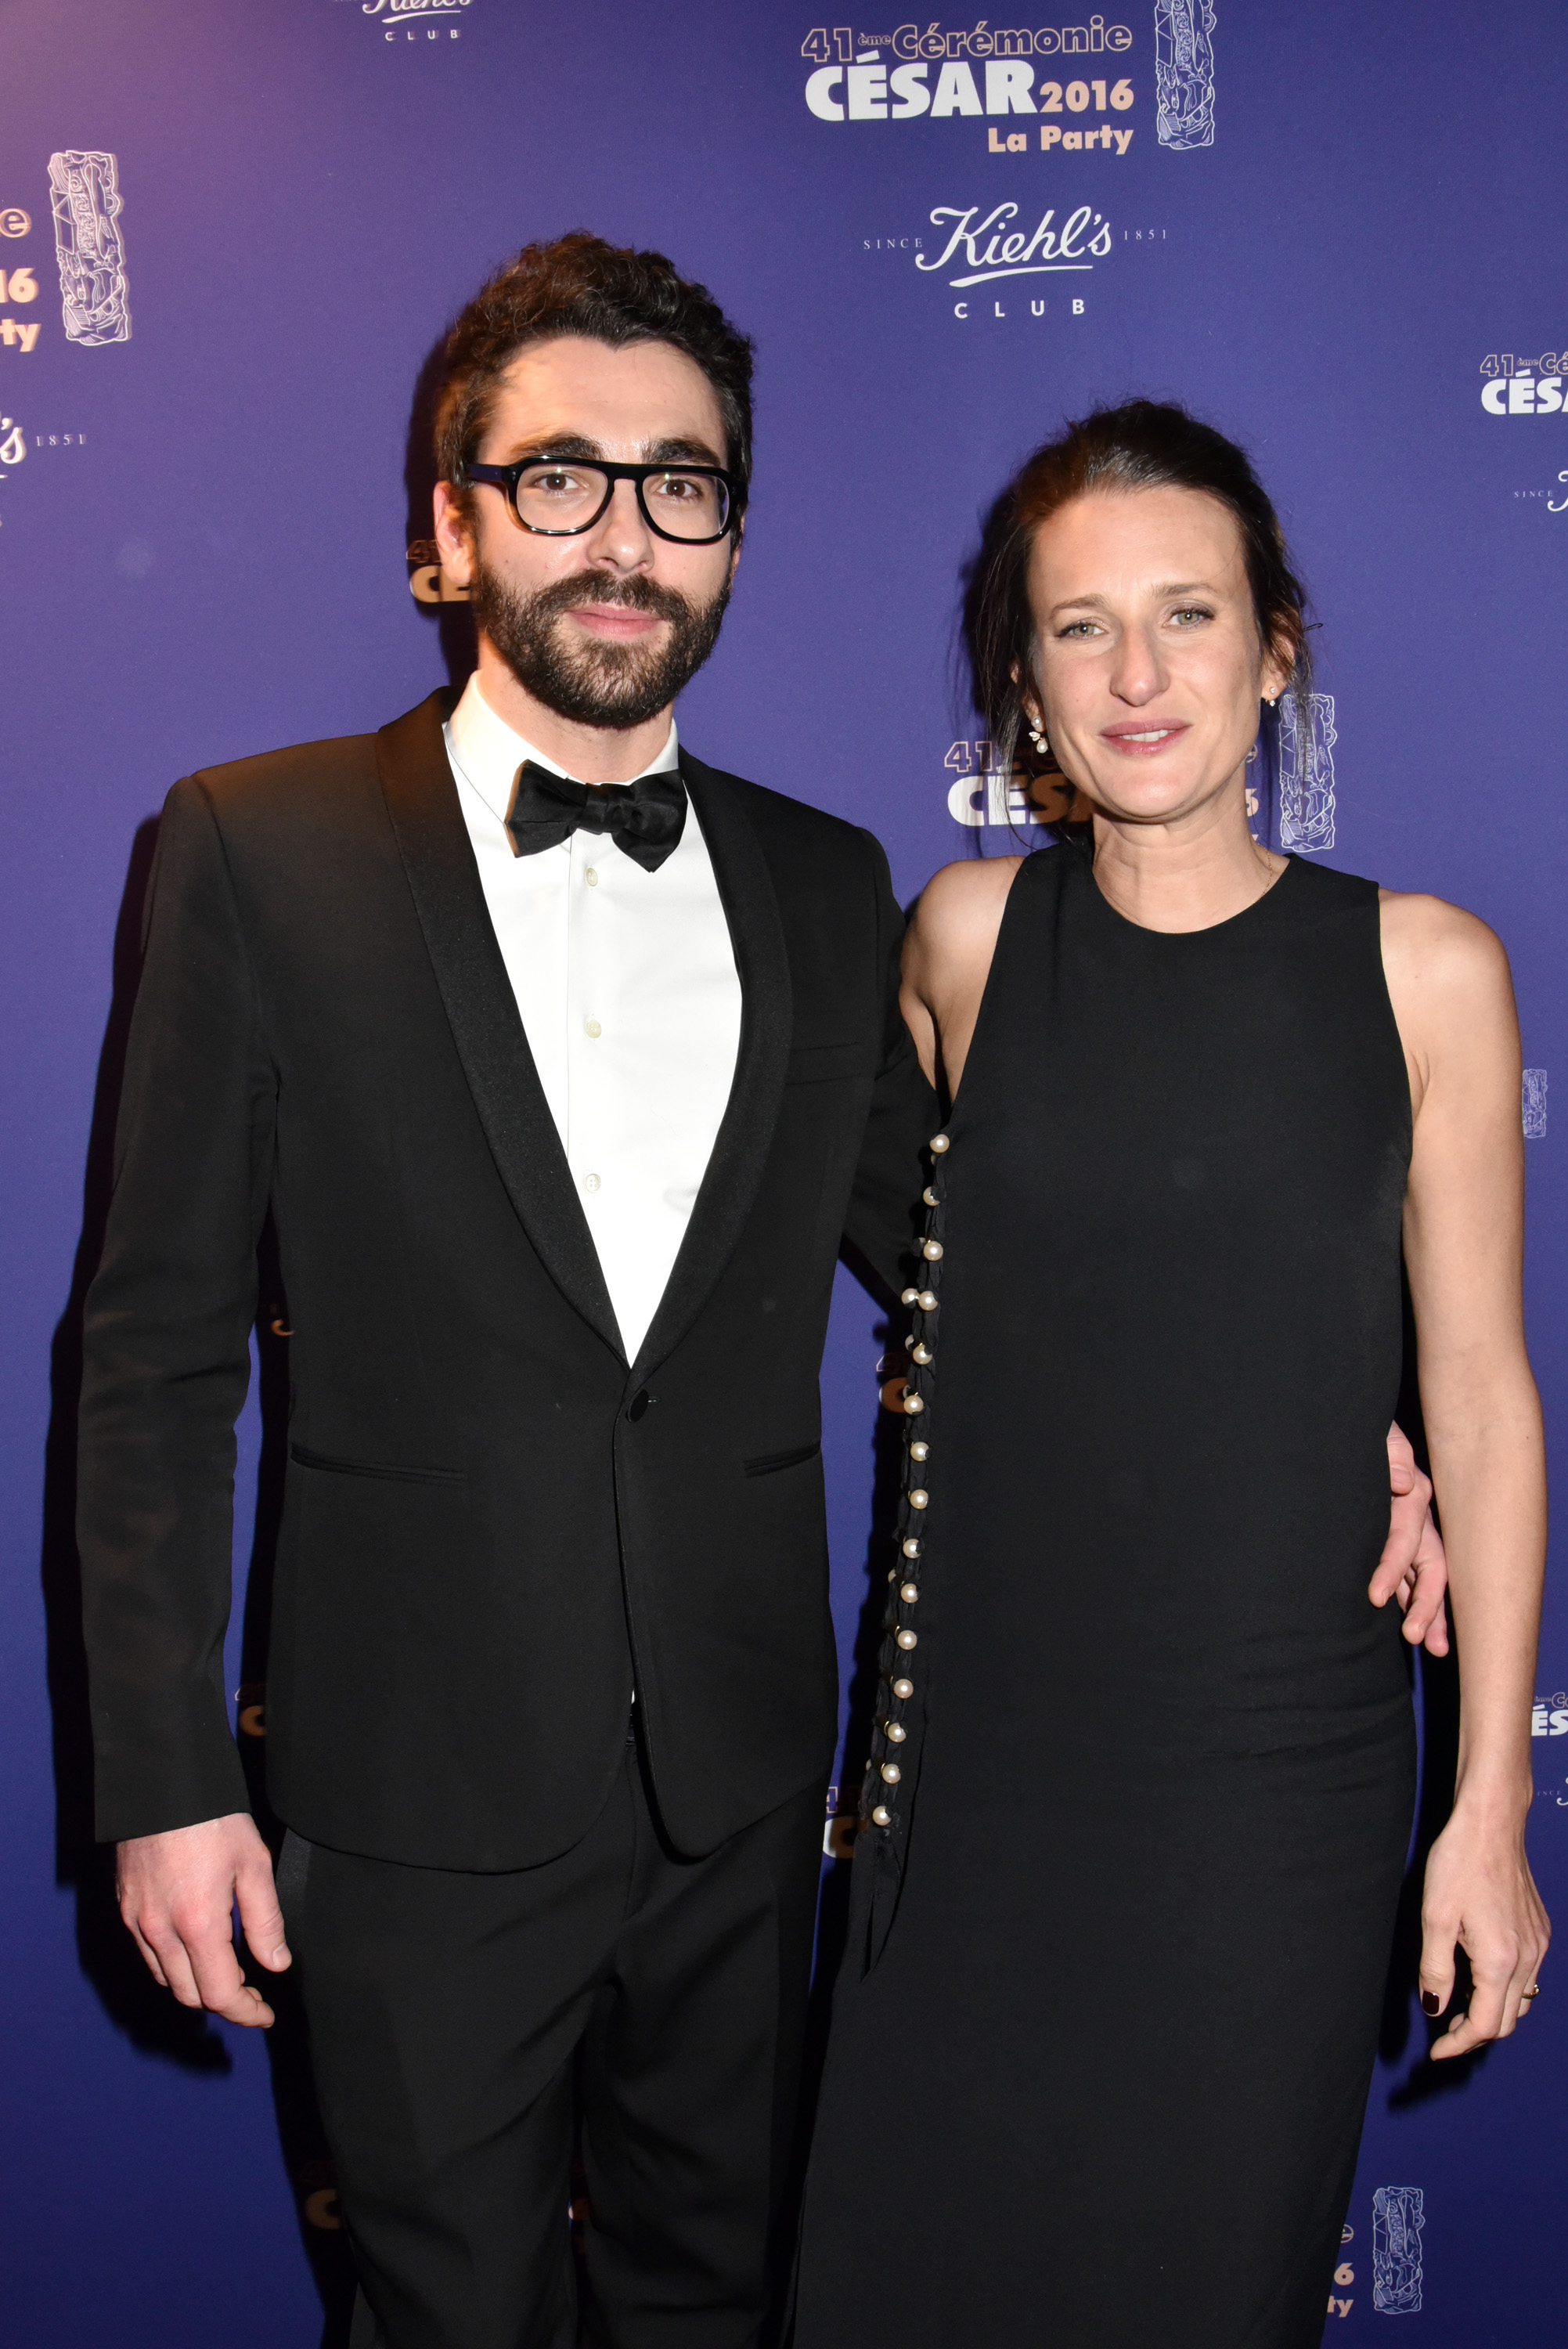 Benjamin Mahon and Camille Cottin attend the photocall at the Queen Club after The Cesar Film Awards 2016 on February 26, 2016, in Paris, France. | Source: Getty Images